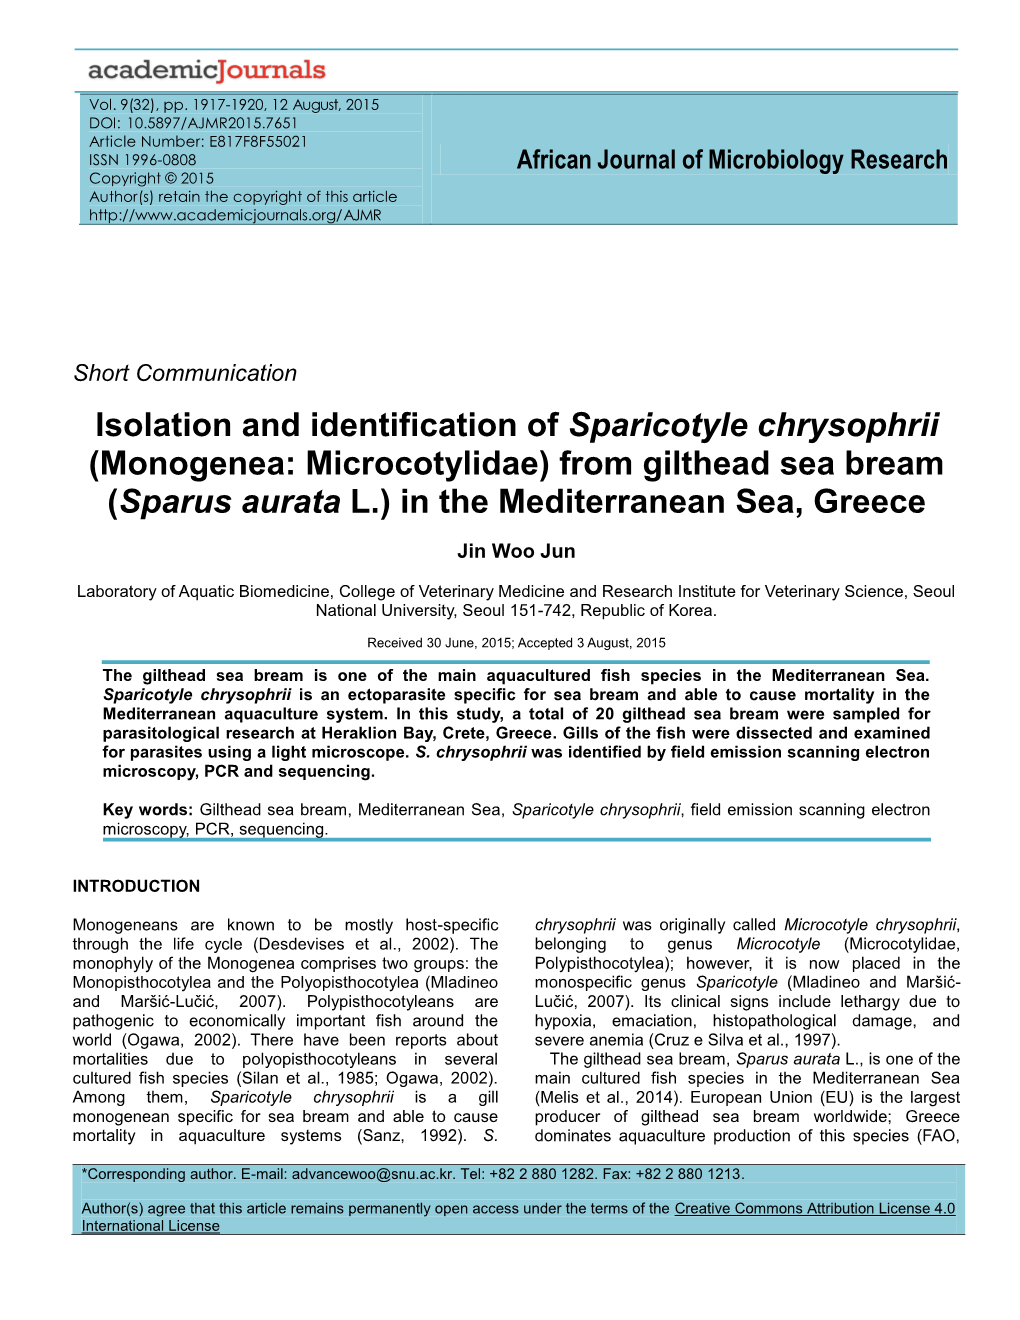 Isolation and Identification of Sparicotyle Chrysophrii (Monogenea: Microcotylidae) from Gilthead Sea Bream (Sparus Aurata L.) in the Mediterranean Sea, Greece